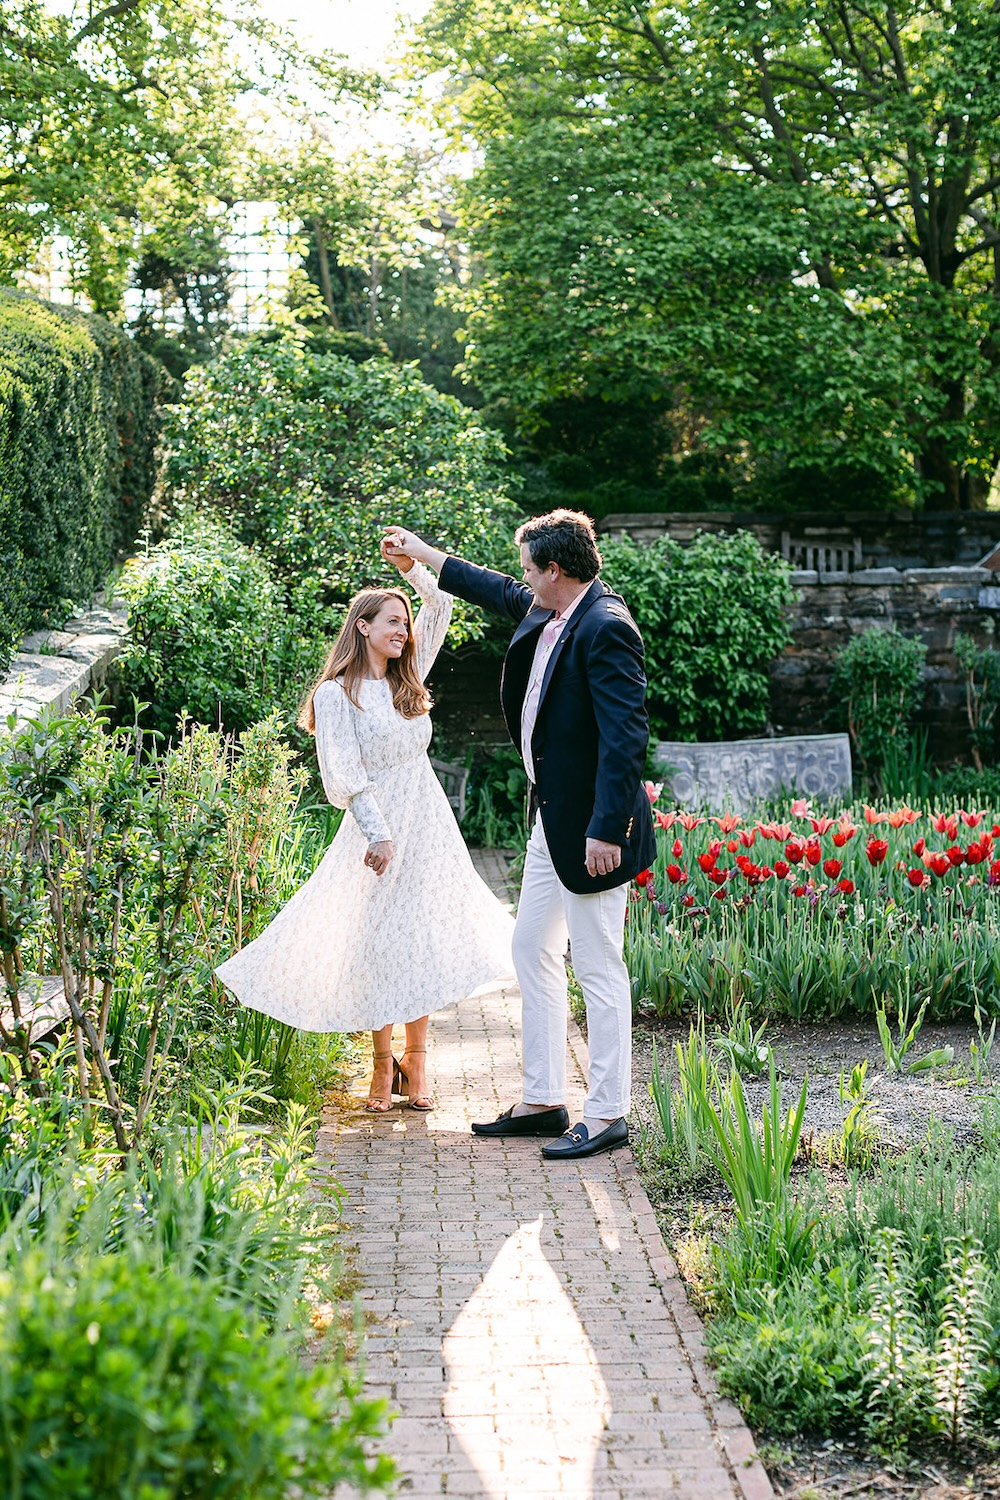 Couple dancing in garden. Spring wedding engagement photo session. Sarah Bradshaw Photography.